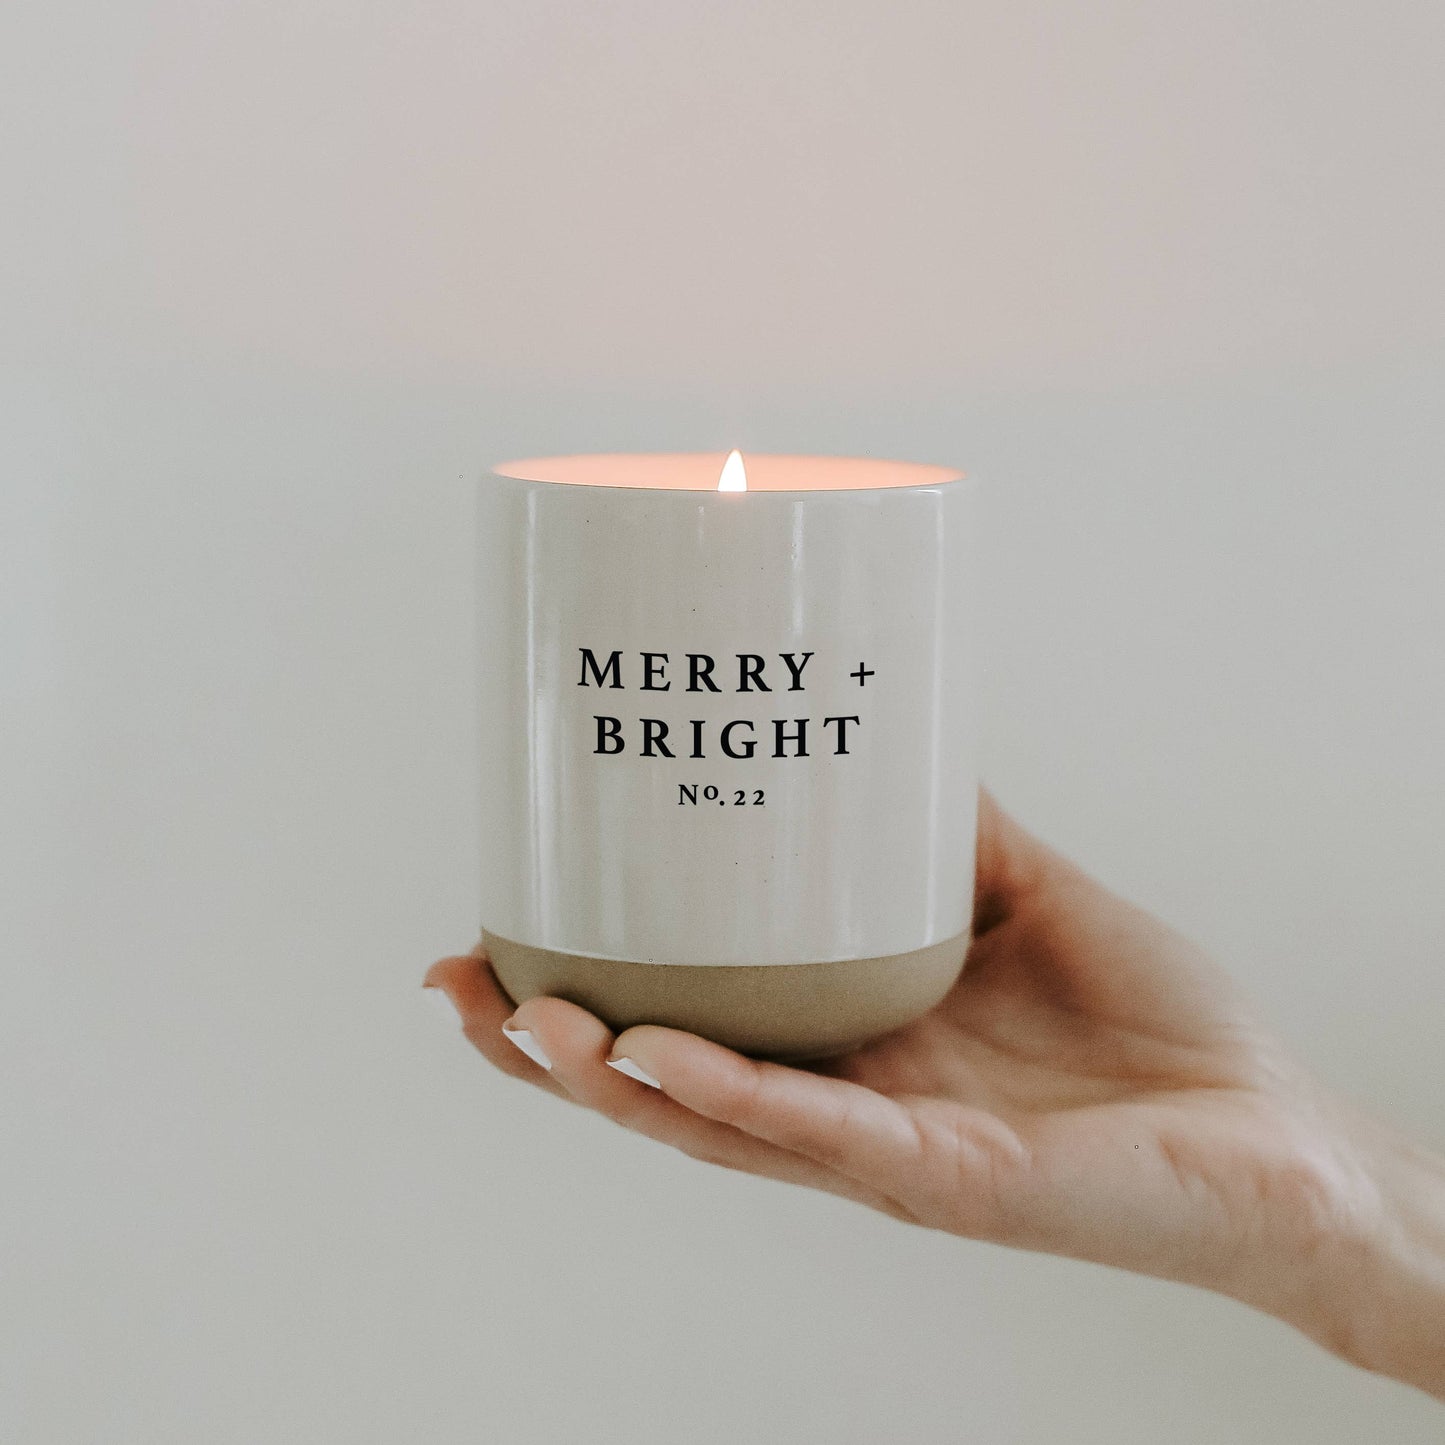 Merry and Bright 12 oz Soy Candle - Christmas Home & Gifts